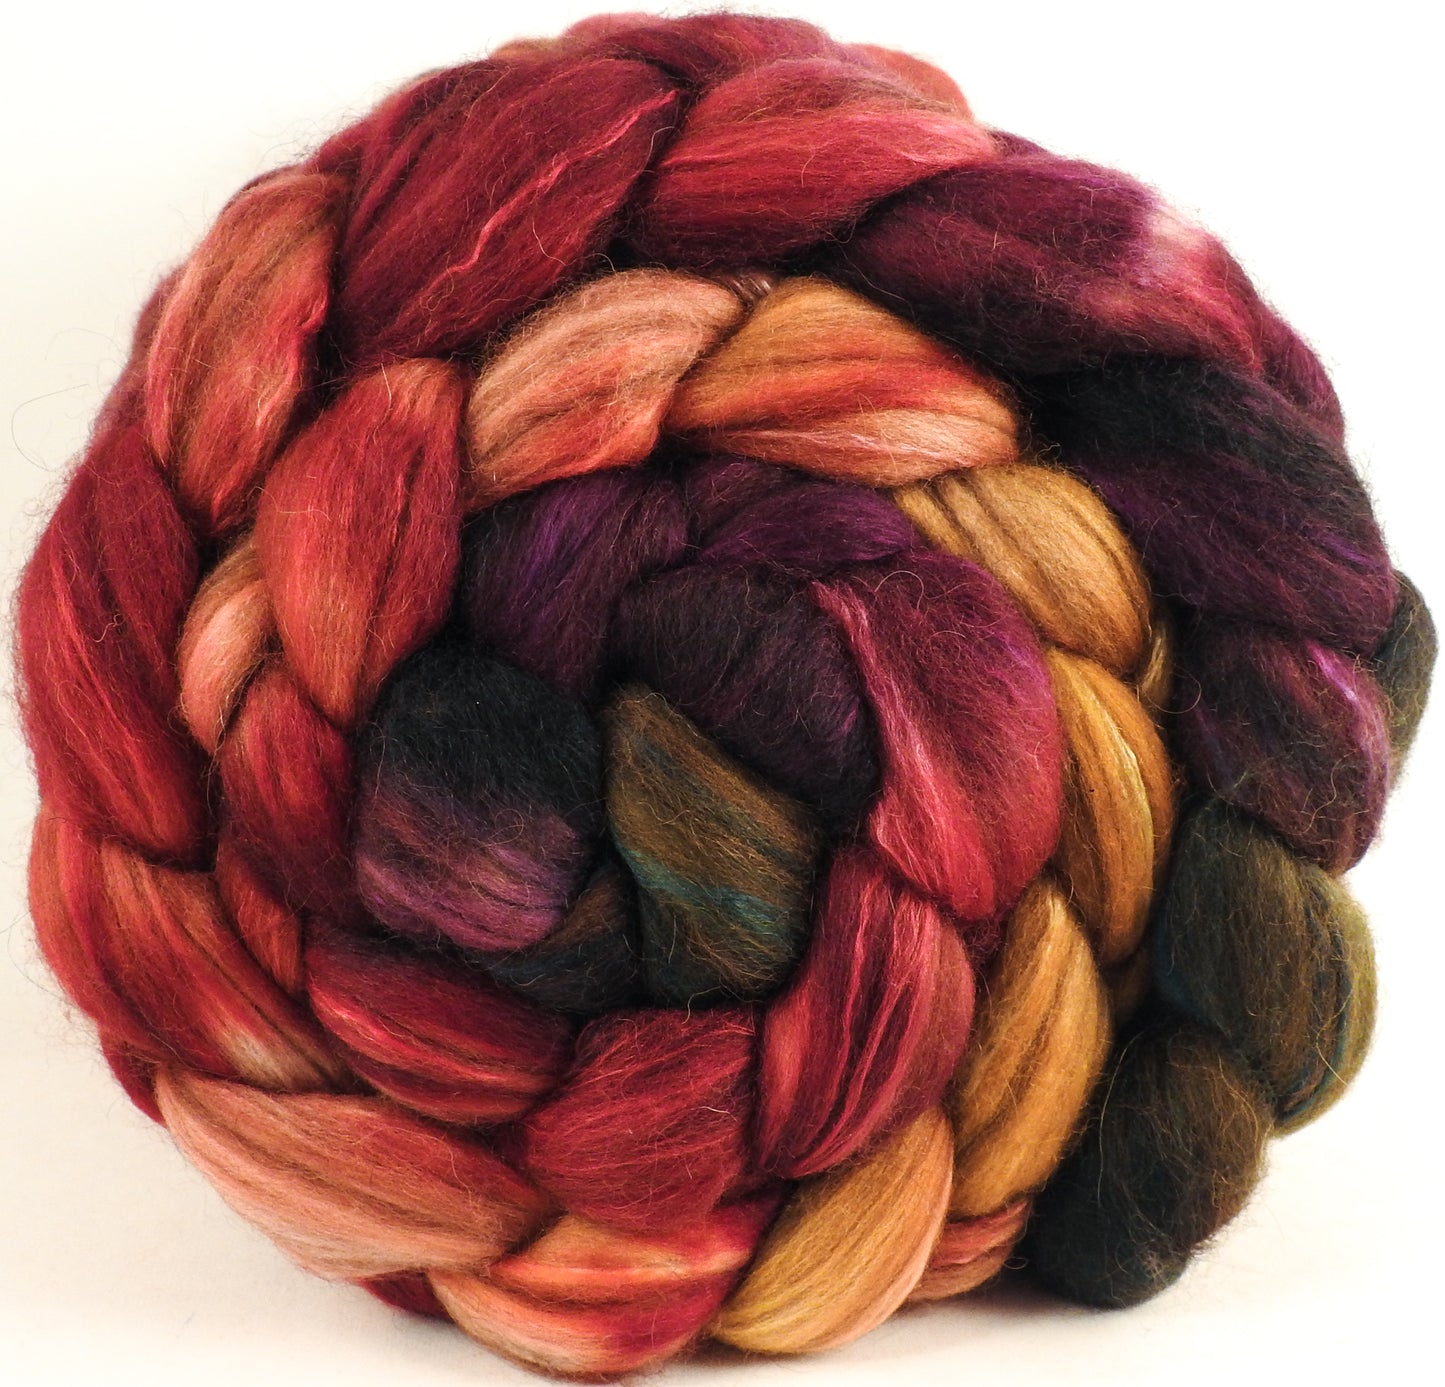 Hand dyed top for spinning -Cherry Medley (5.5 oz.) 18.5 mic merino/ camel/ brown alpaca/ mulberry silk/ (40/20/20/20)